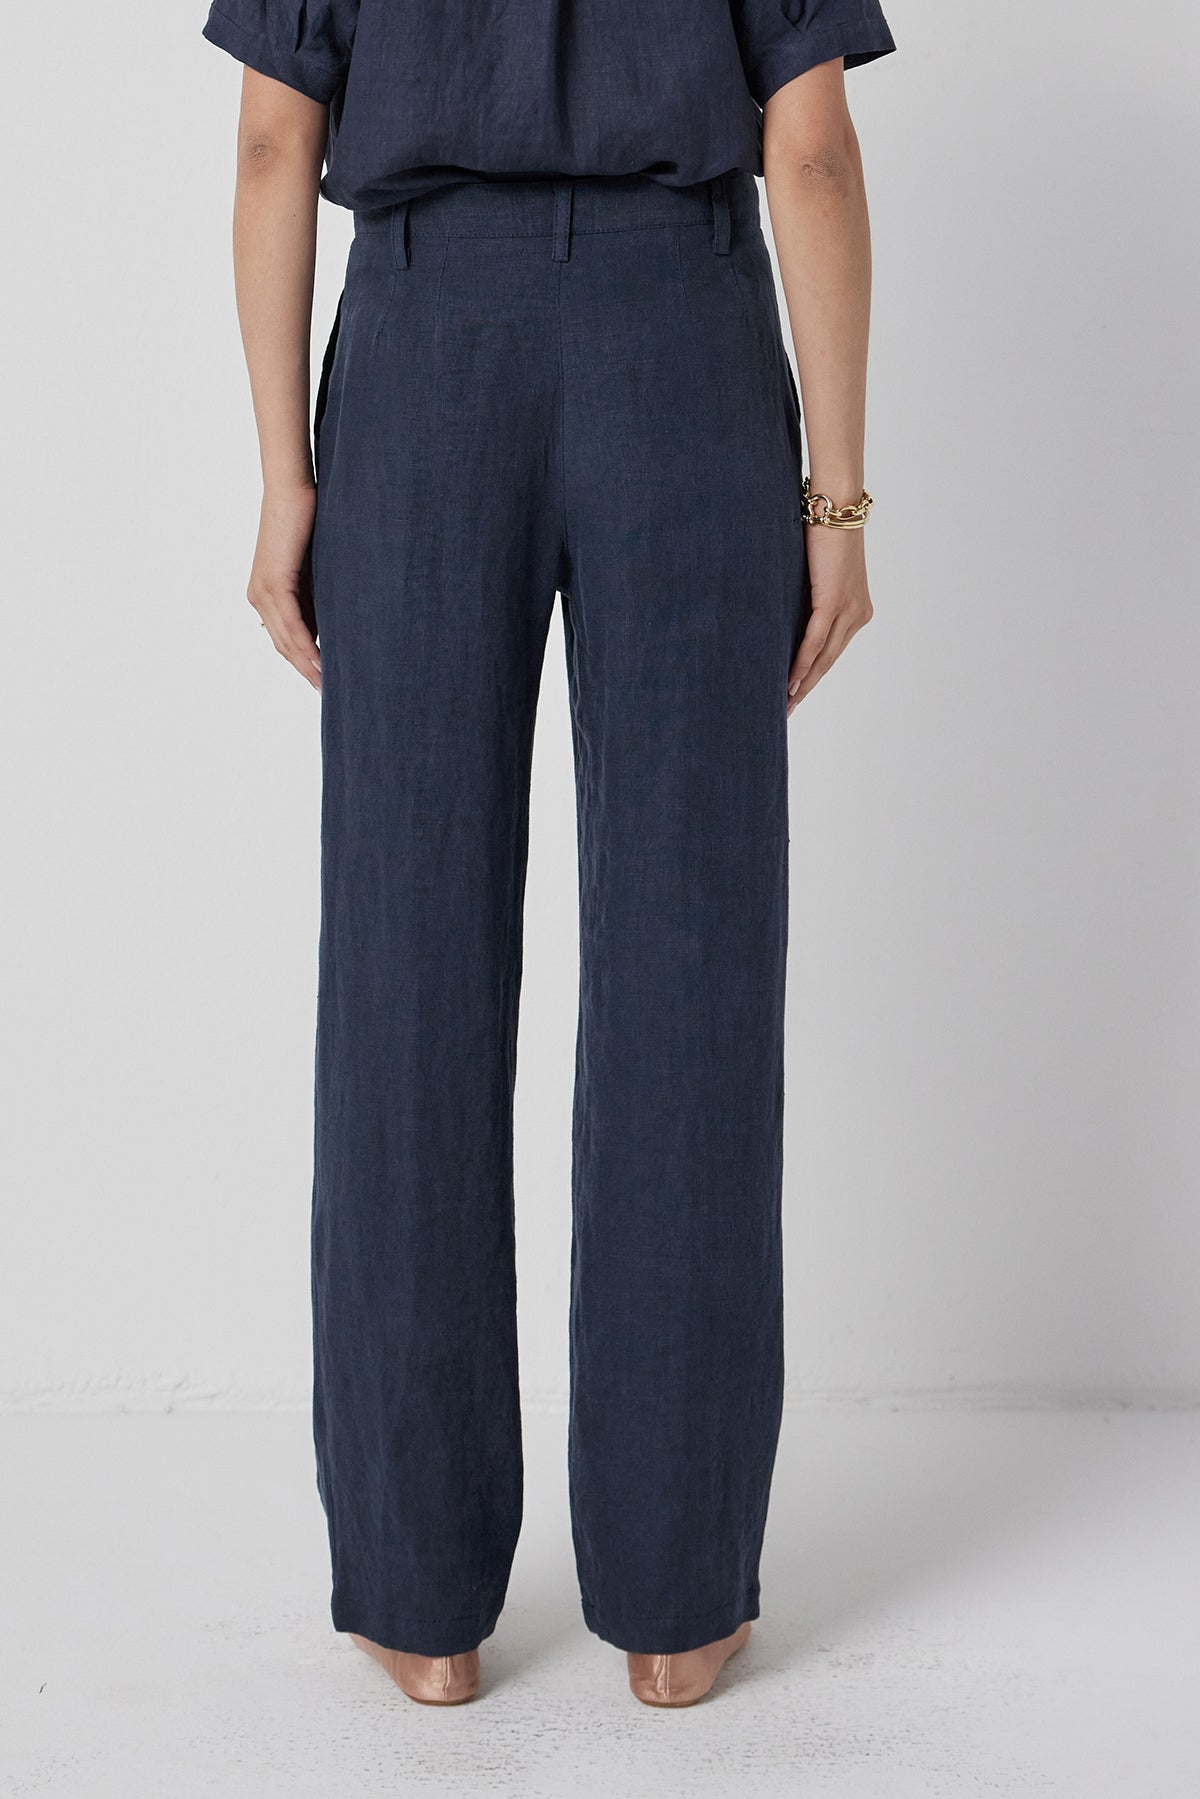   A person standing in Velvet by Jenny Graham's POMONA PANT trousers and a matching top with their hands partially tucked into pockets. 